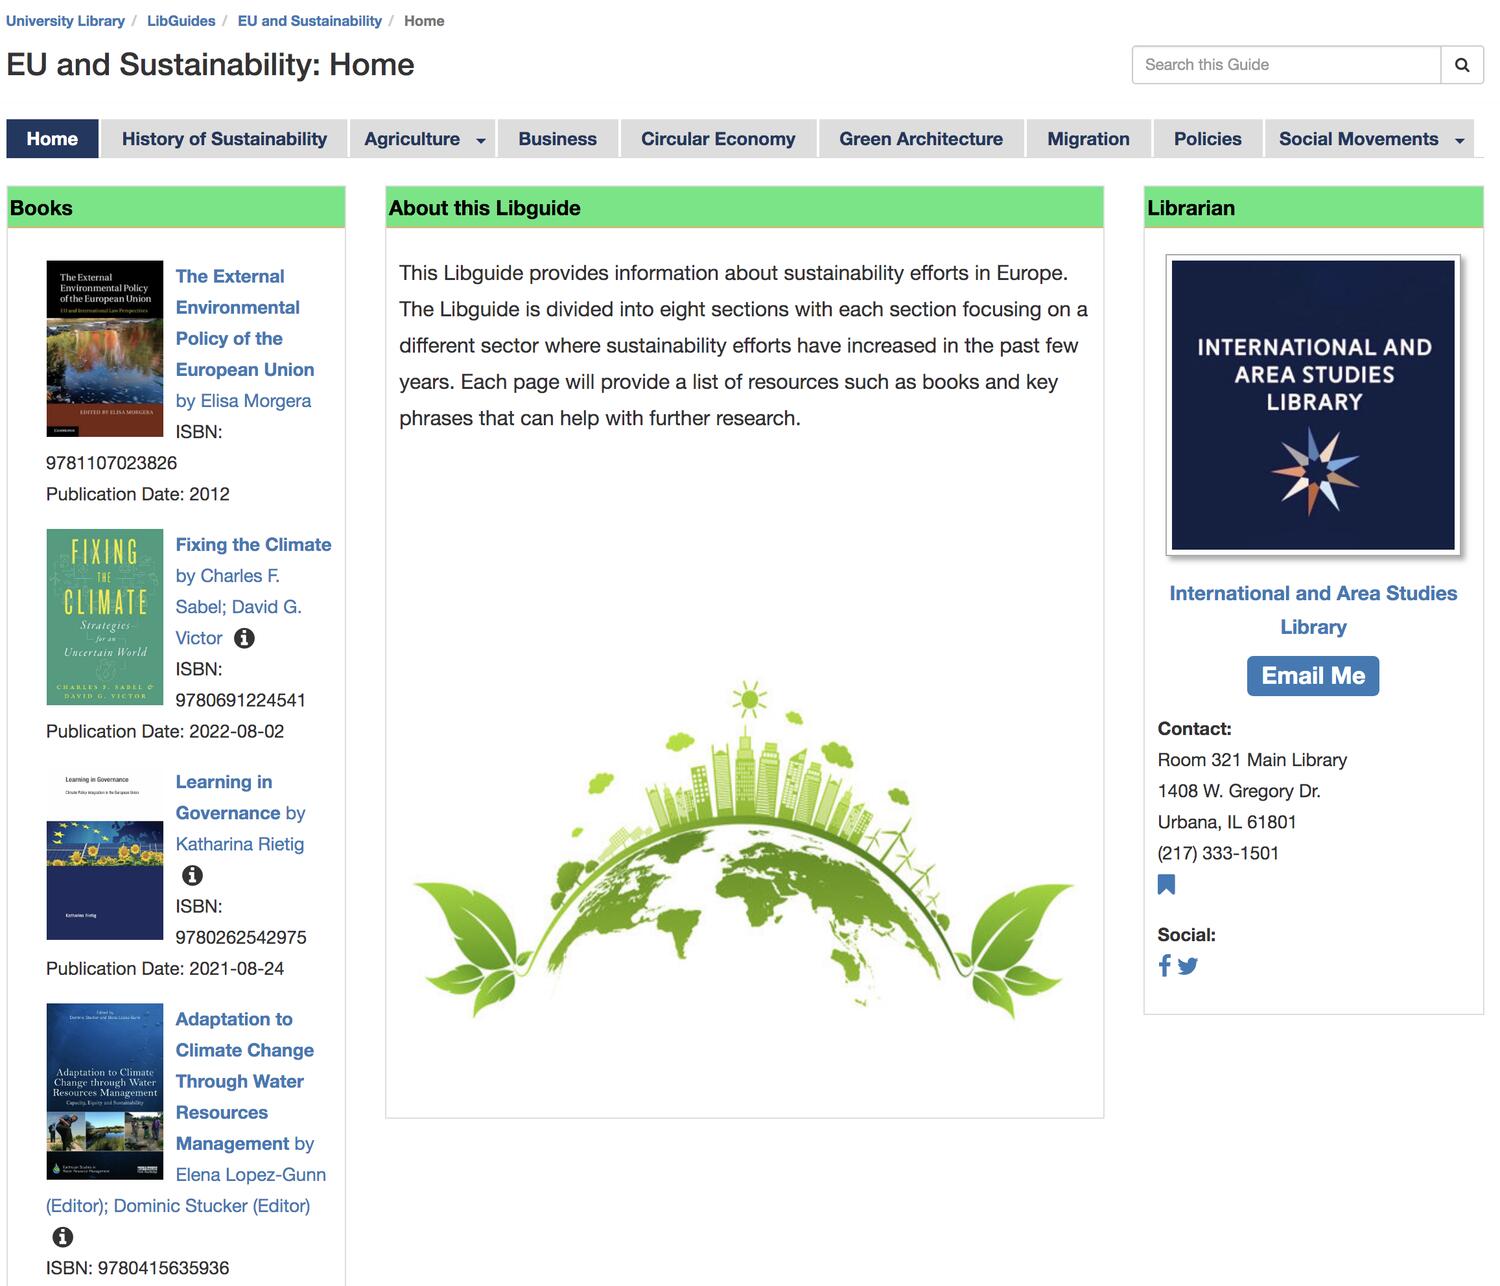 EU and Sustainability LibGuide